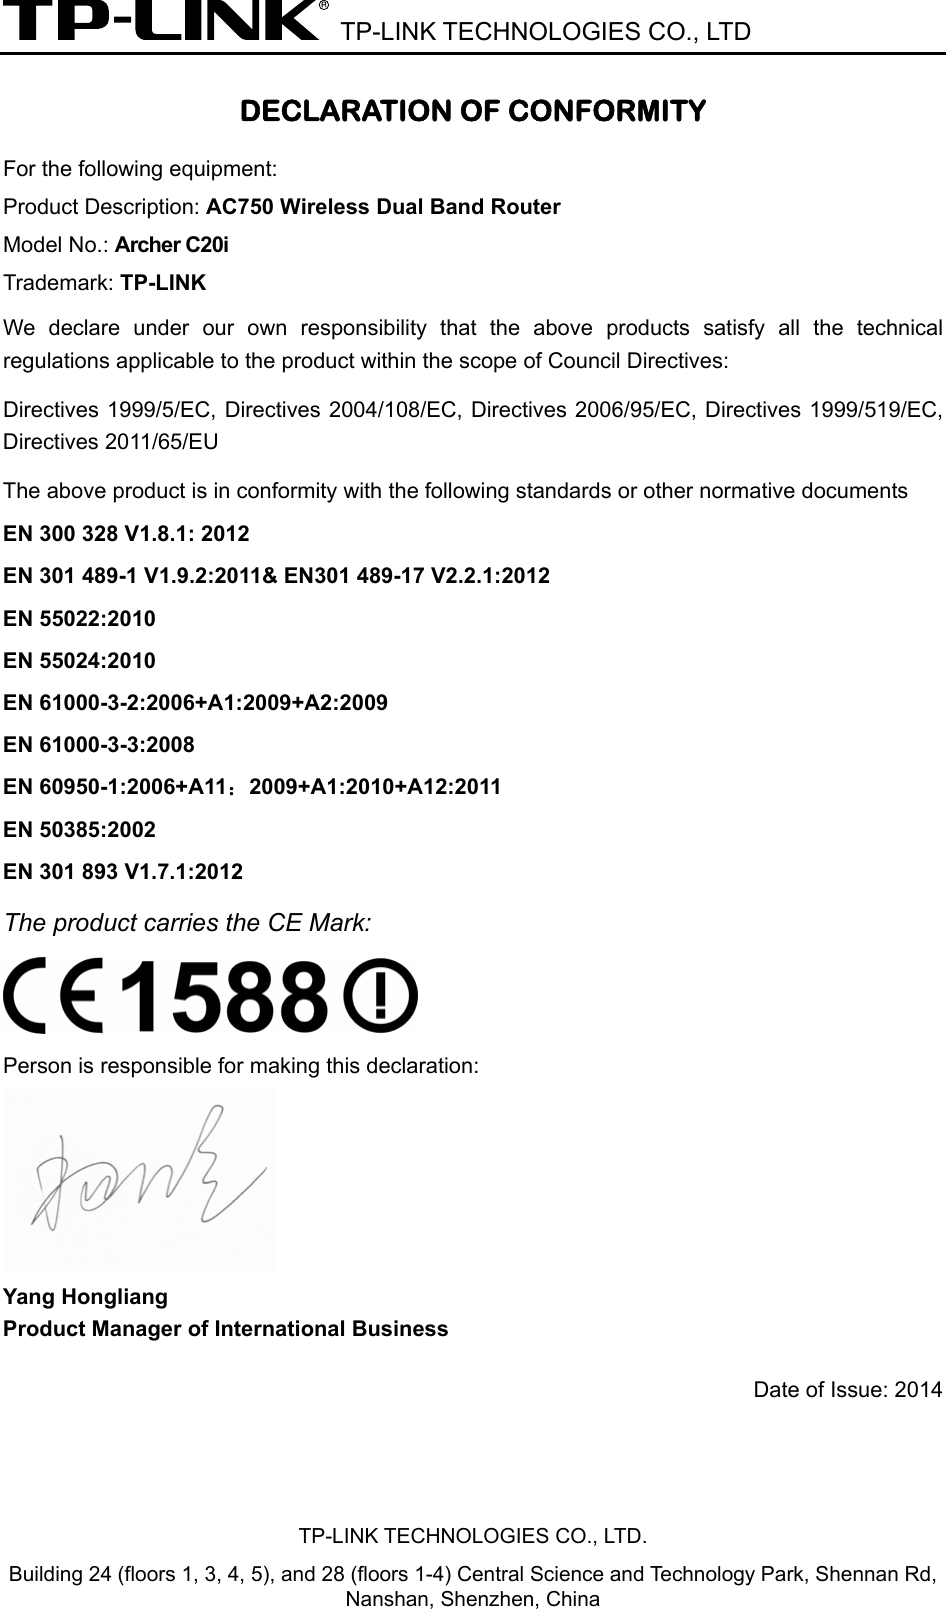  TP-LINK TECHNOLOGIES CO., LTD DECLARATION OF CONFORMITY For the following equipment: Product Description: AC750 Wireless Dual Band Router Model No.: Archer C20i Trademark: TP-LINK We declare under our own responsibility that the above products satisfy all the technical regulations applicable to the product within the scope of Council Directives:     Directives 1999/5/EC, Directives 2004/108/EC, Directives 2006/95/EC, Directives 1999/519/EC, Directives 2011/65/EU The above product is in conformity with the following standards or other normative documents EN 300 328 V1.8.1: 2012 EN 301 489-1 V1.9.2:2011&amp; EN301 489-17 V2.2.1:2012 EN 55022:2010 EN 55024:2010 EN 61000-3-2:2006+A1:2009+A2:2009 EN 61000-3-3:2008 EN 60950-1:2006+A11：2009+A1:2010+A12:2011 EN 50385:2002 EN 301 893 V1.7.1:2012 The product carries the CE Mark:   Person is responsible for making this declaration:  Yang Hongliang Product Manager of International Business   Date of Issue: 2014 TP-LINK TECHNOLOGIES CO., LTD. Building 24 (floors 1, 3, 4, 5), and 28 (floors 1-4) Central Science and Technology Park, Shennan Rd, Nanshan, Shenzhen, China 